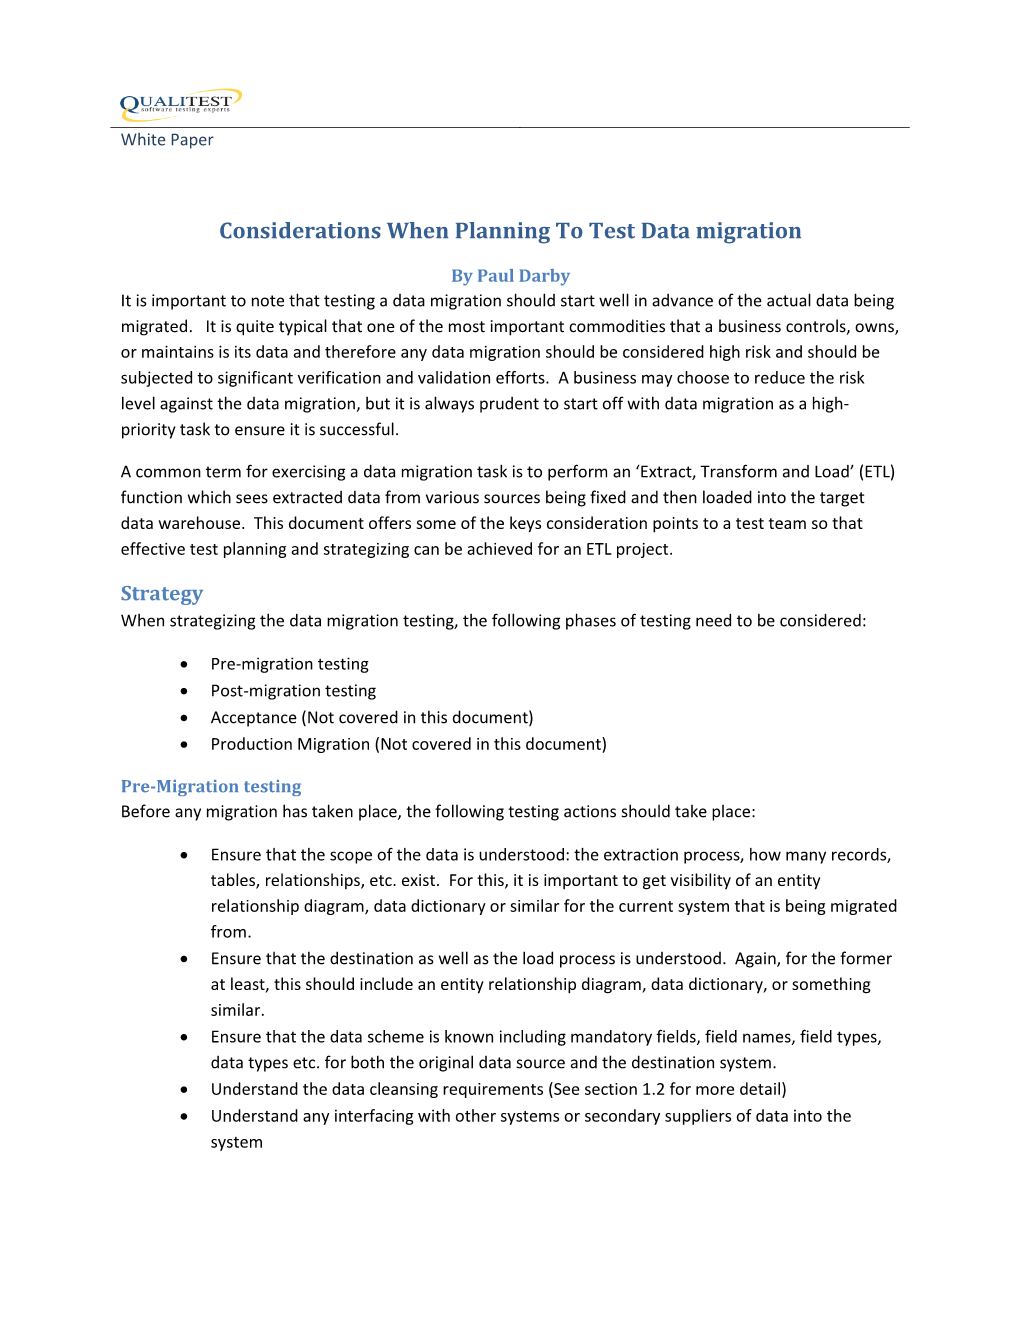 Considerations When Planning to Test Data Migration